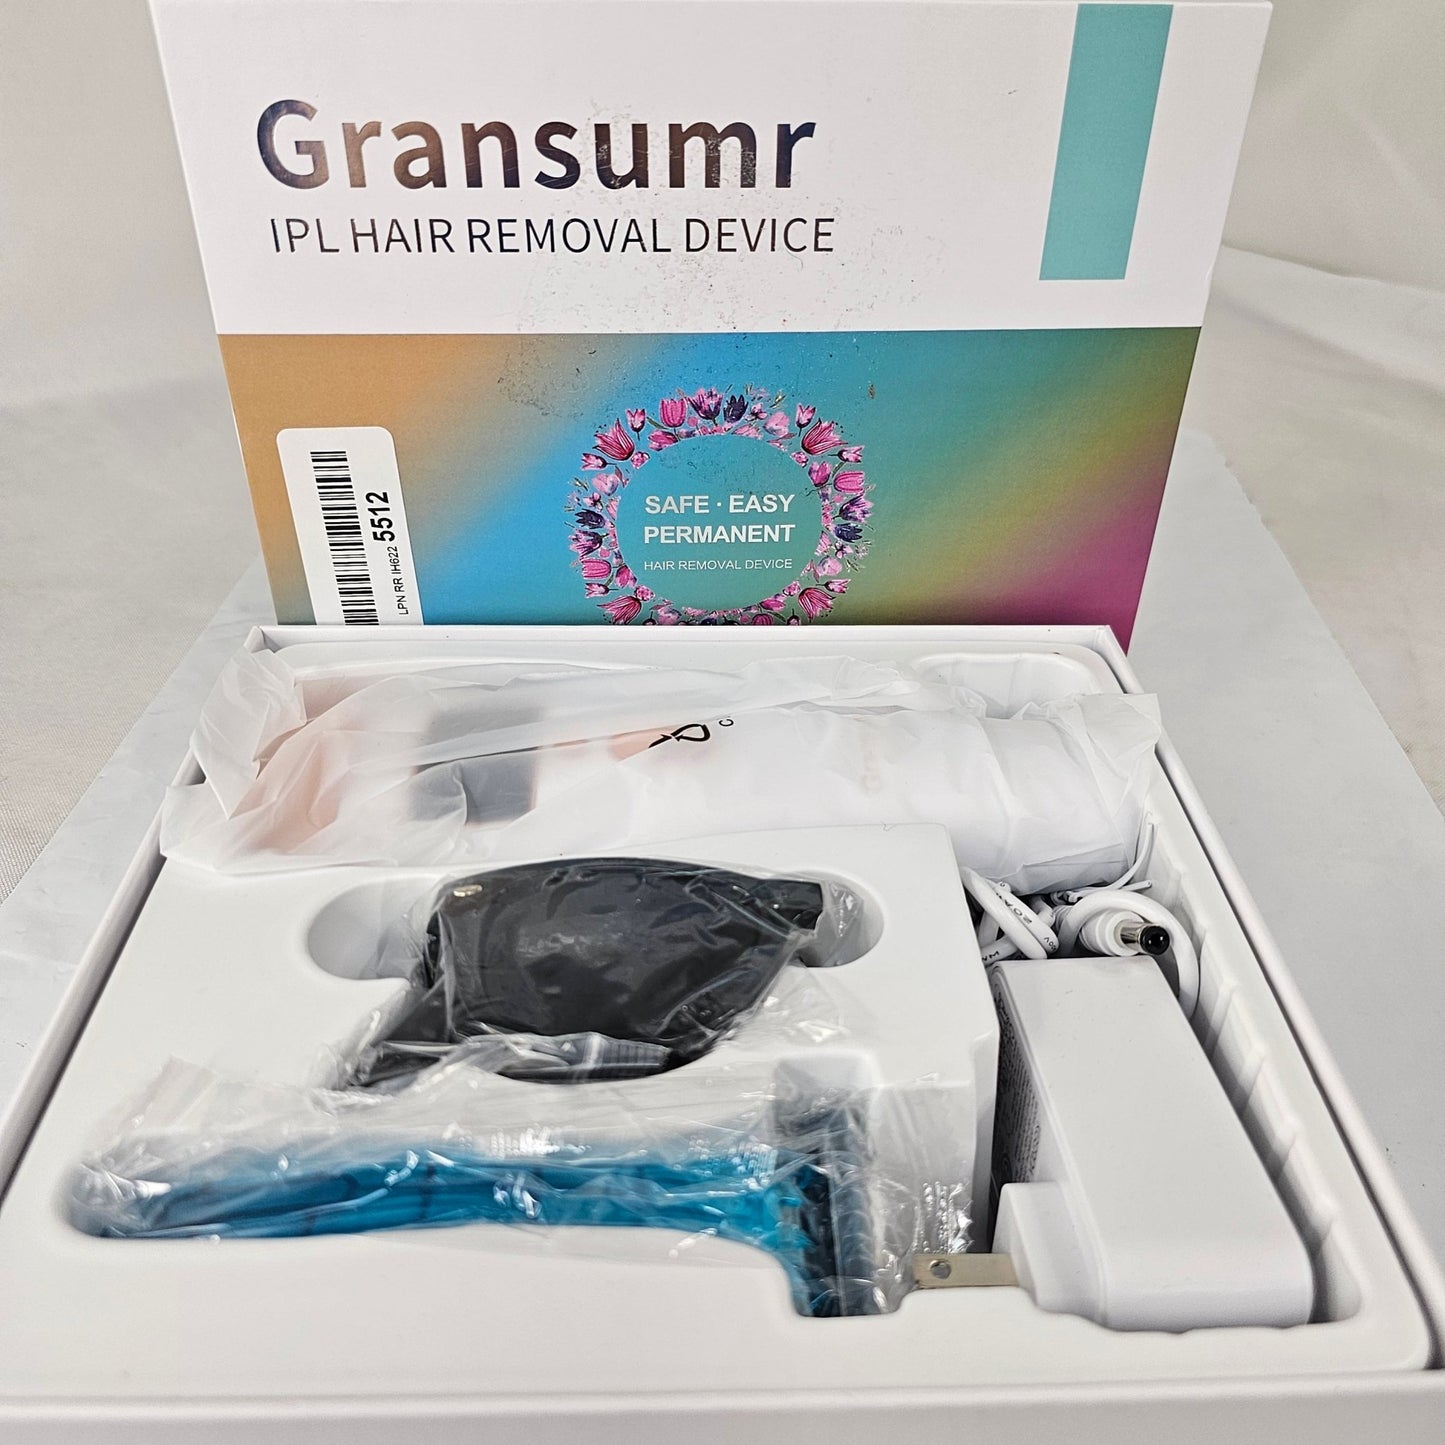 IPL Hair Removal Device | 5 Stage Strength | Permanent Hair Reduction | Safe & Easy - DQ Distribution